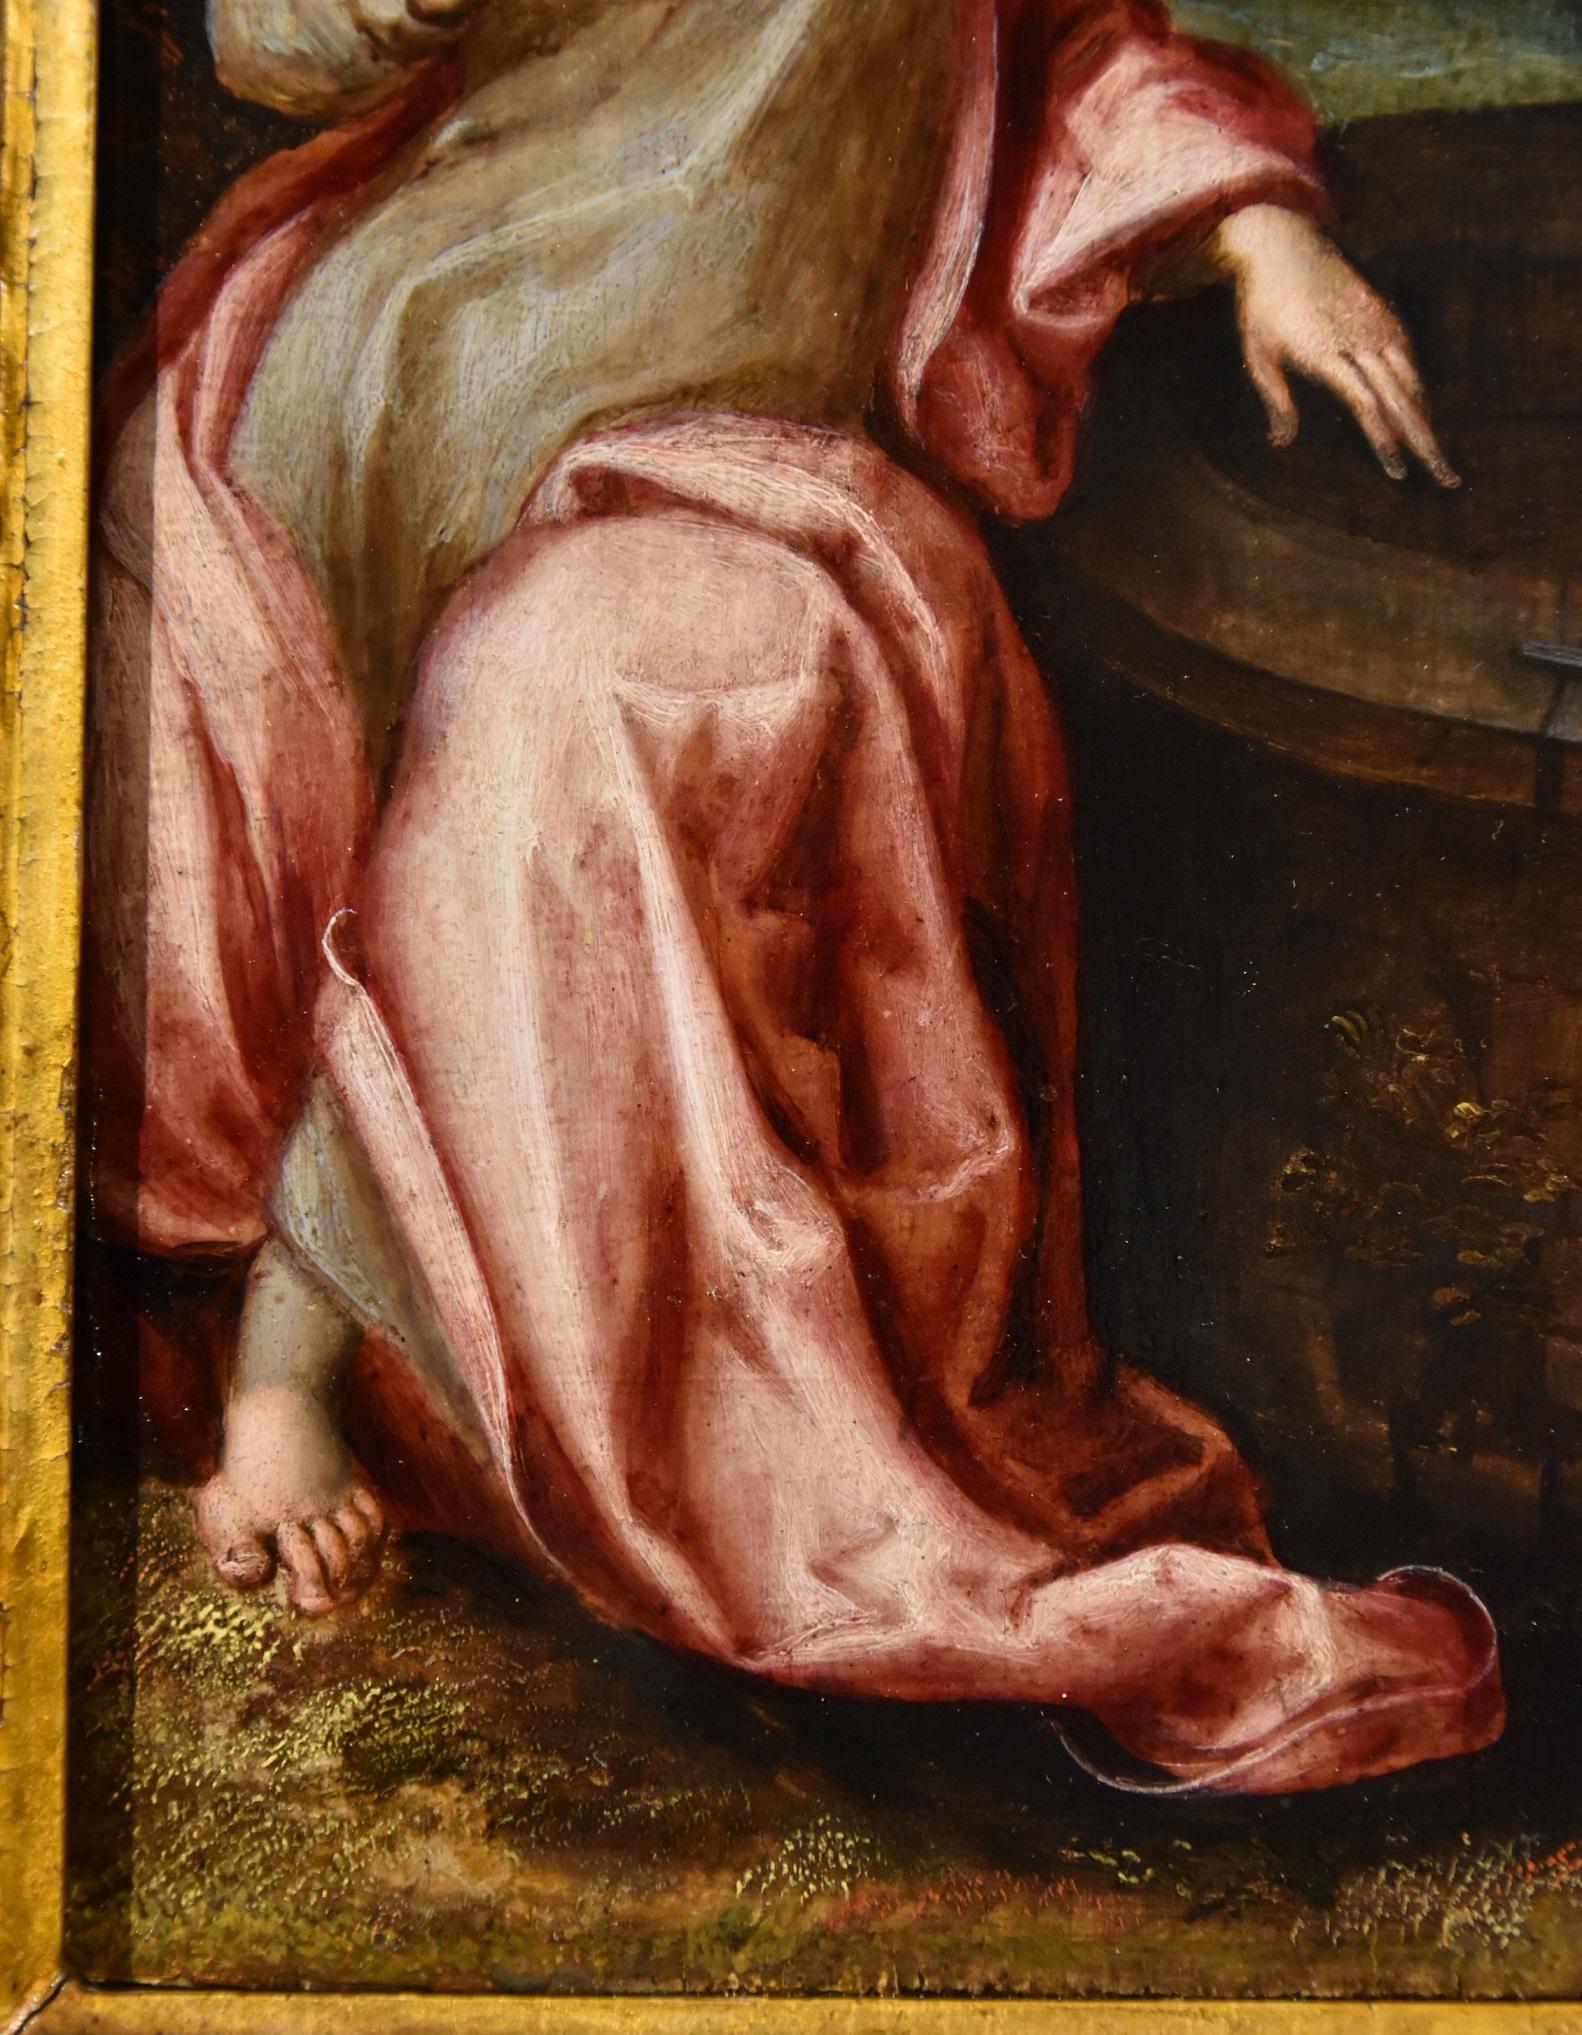 Christ and the Samaritan woman at the well
Attributable to Ludovico Pozzoserrato (Antwerp circa 1550 - Treviso 1605)

Oil on the table
37 x 27 cm., In frame 52 x 42 cm.

The subject illustrated in this refined painting is taken from the Gospel of